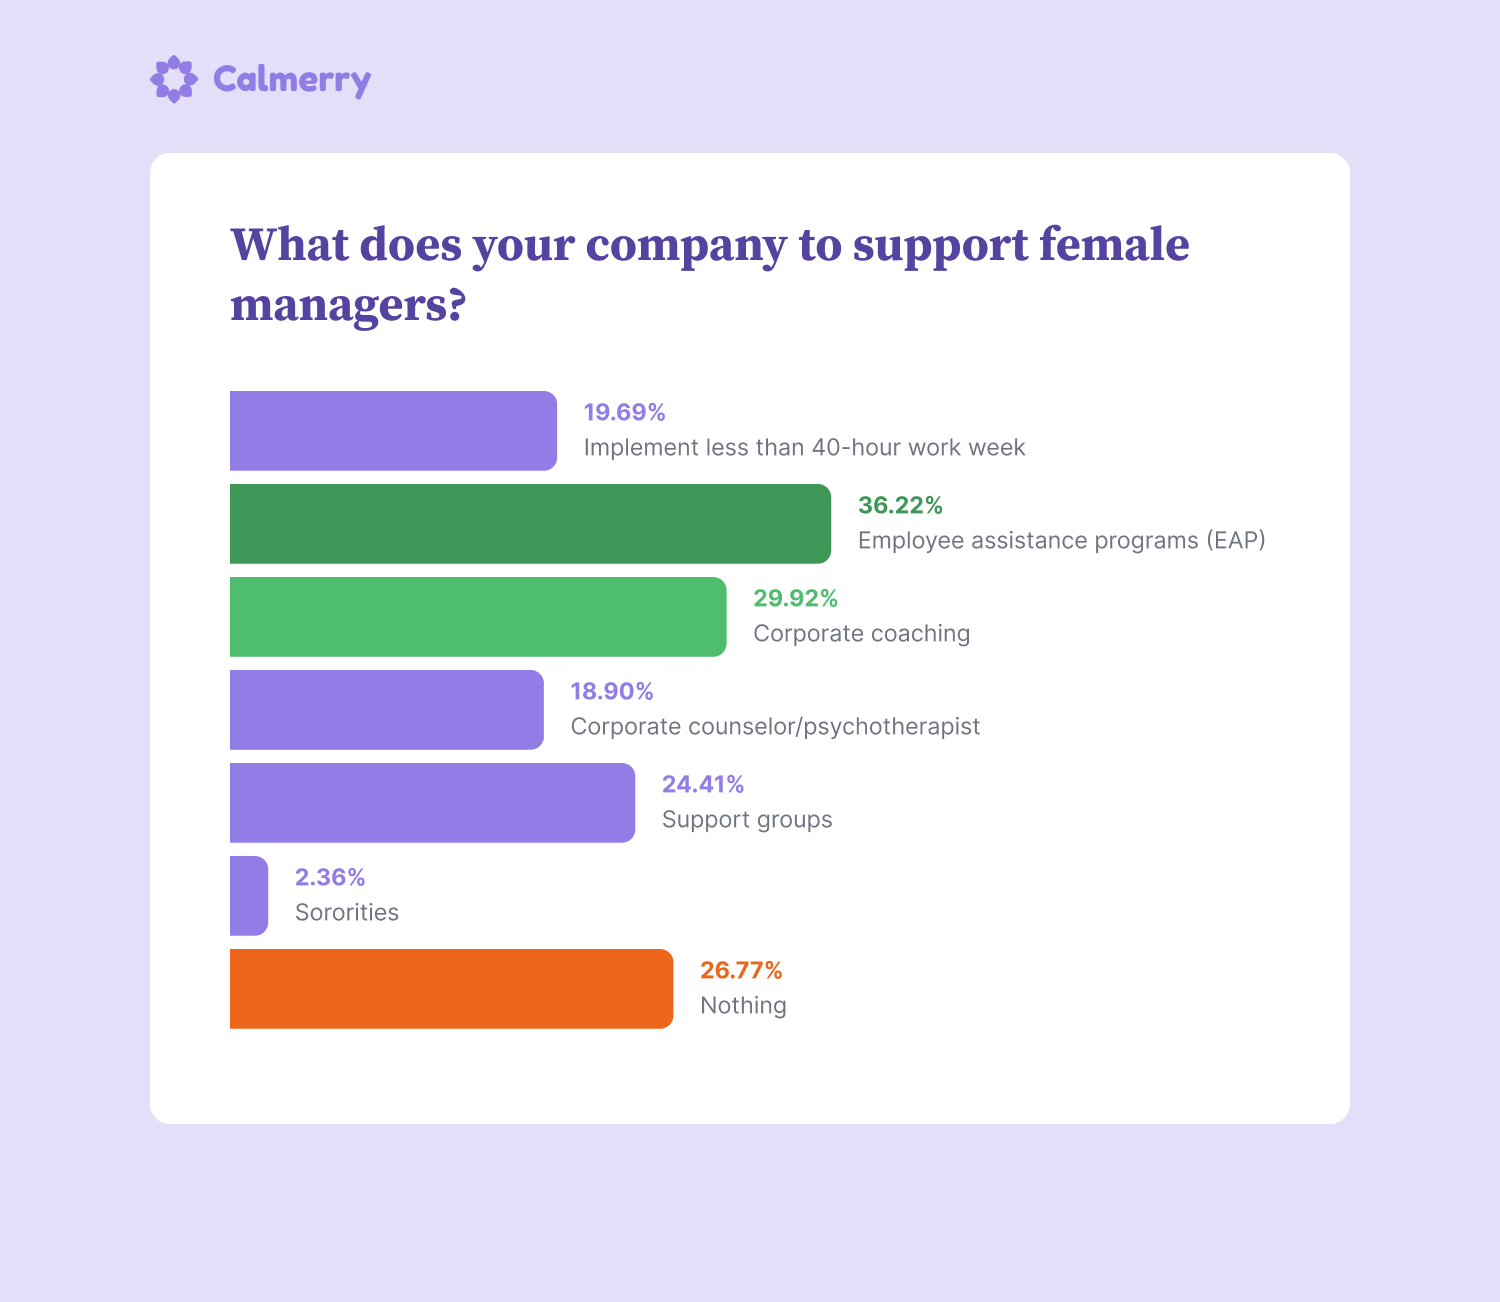 What does your company to support female managers? Implement less than 40-hour work week 25 19.69% Employee assistance programs (EAP) 46 36.22% Corporate coaching 38 29.92% Corporate counselor/psychotherapist 24 18.90% Support groups 31 24.41% Sororities 3 2.36% Nothing 34 26.77%